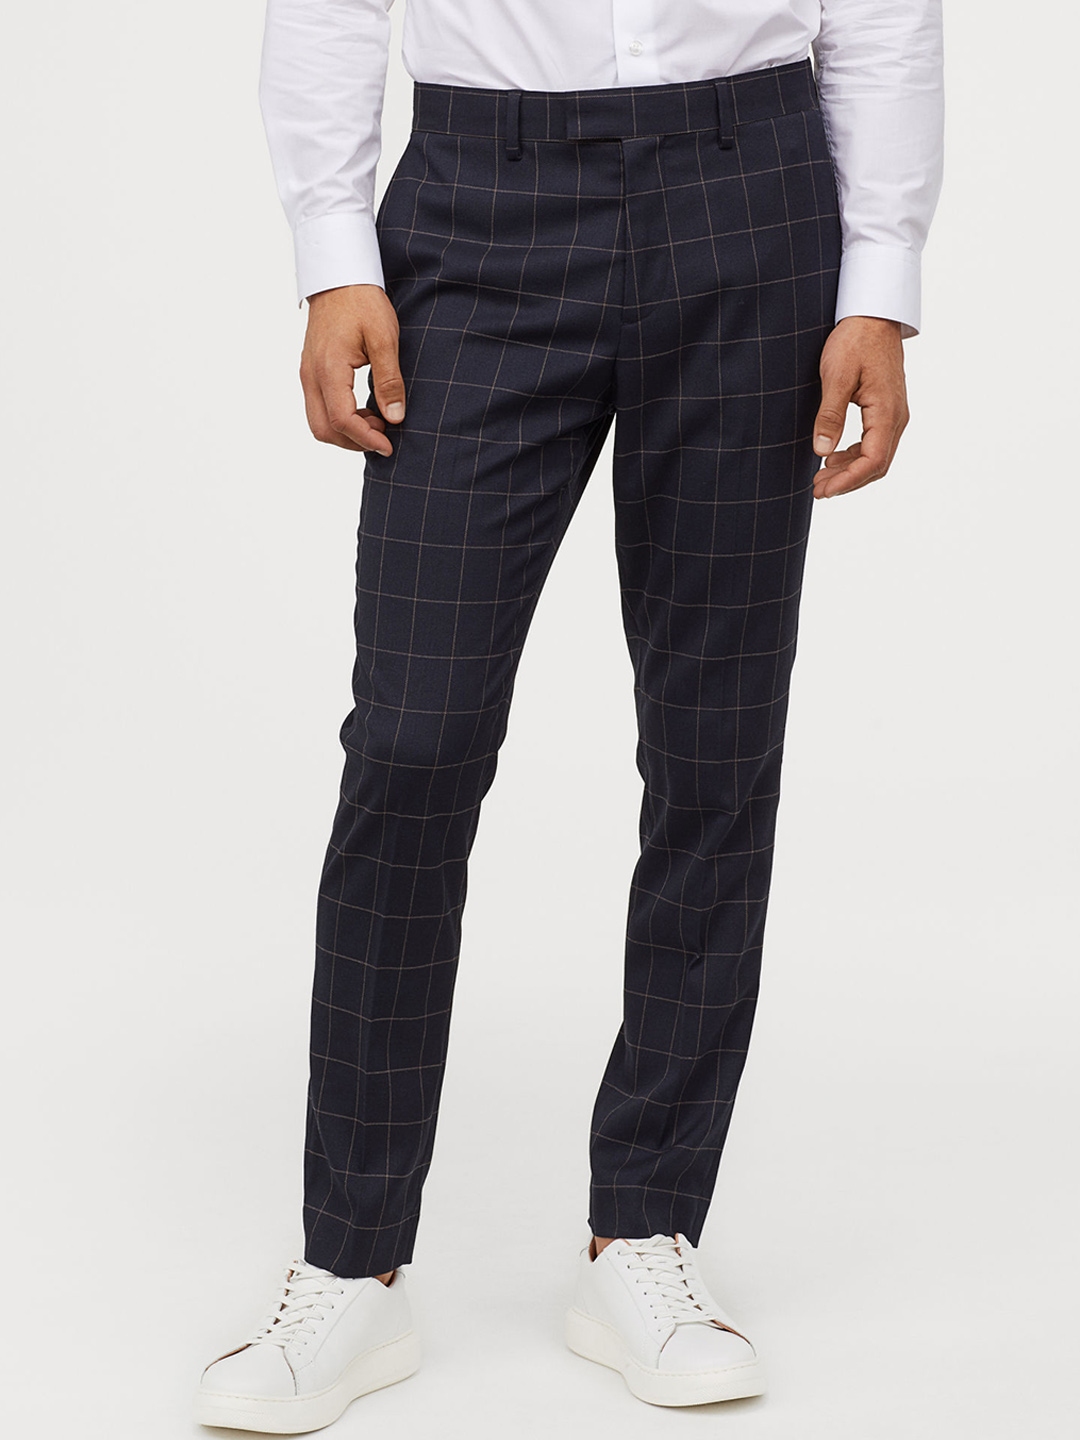 Buy H&M Men Suit Trousers Skinny Fit - Trousers for Men 10478372 | Myntra